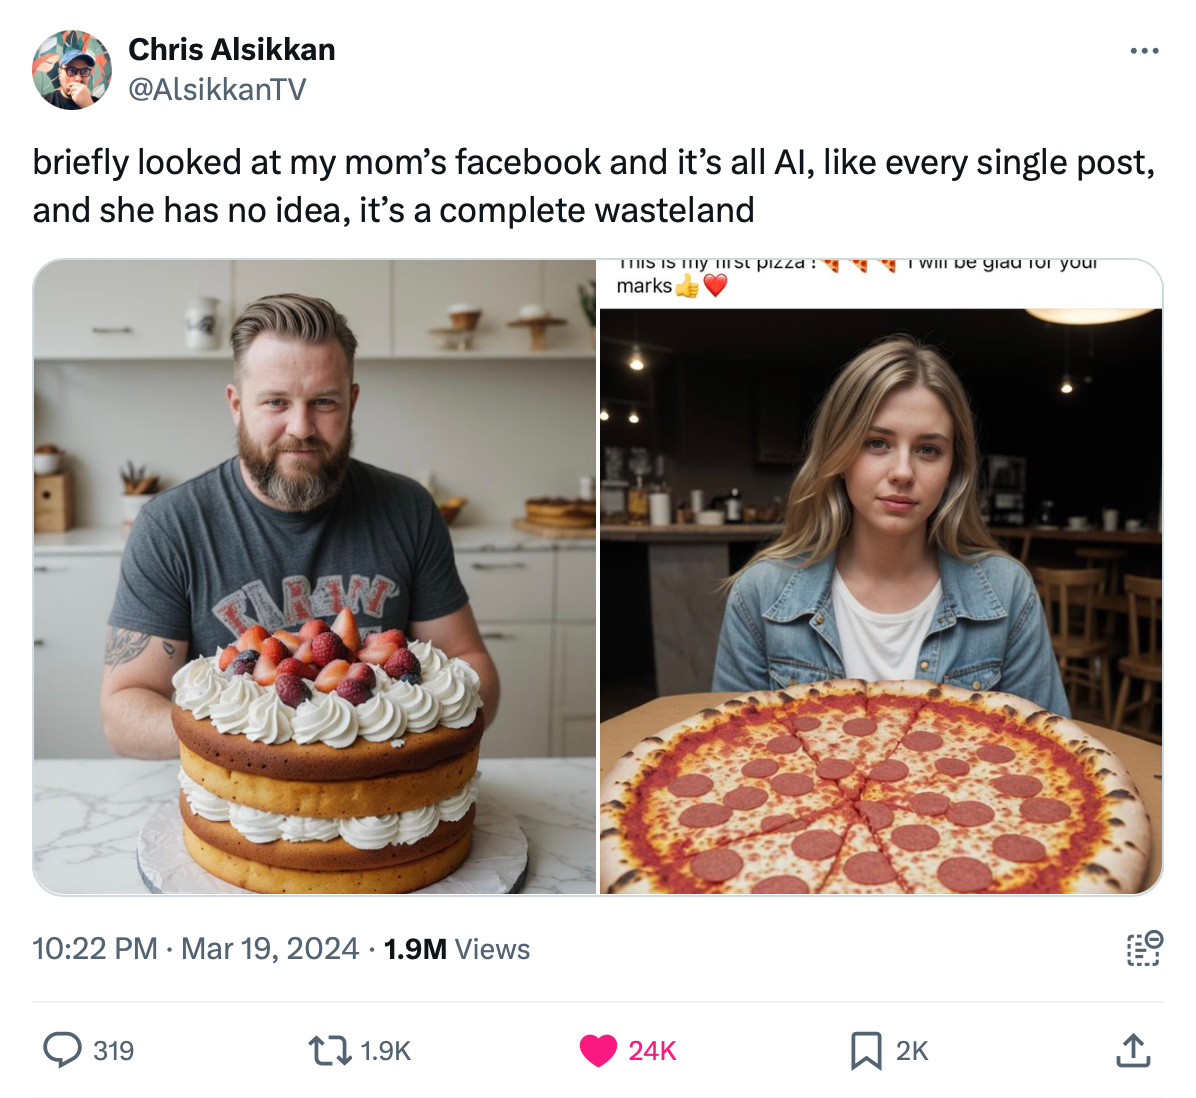 screenshot of Chris Alisikkan tweet: "briefly looked at my mom's facebook and it's all AI, like every single post, and she has no idea, it's a complete wasteland" with two AI-generated pictures below the text